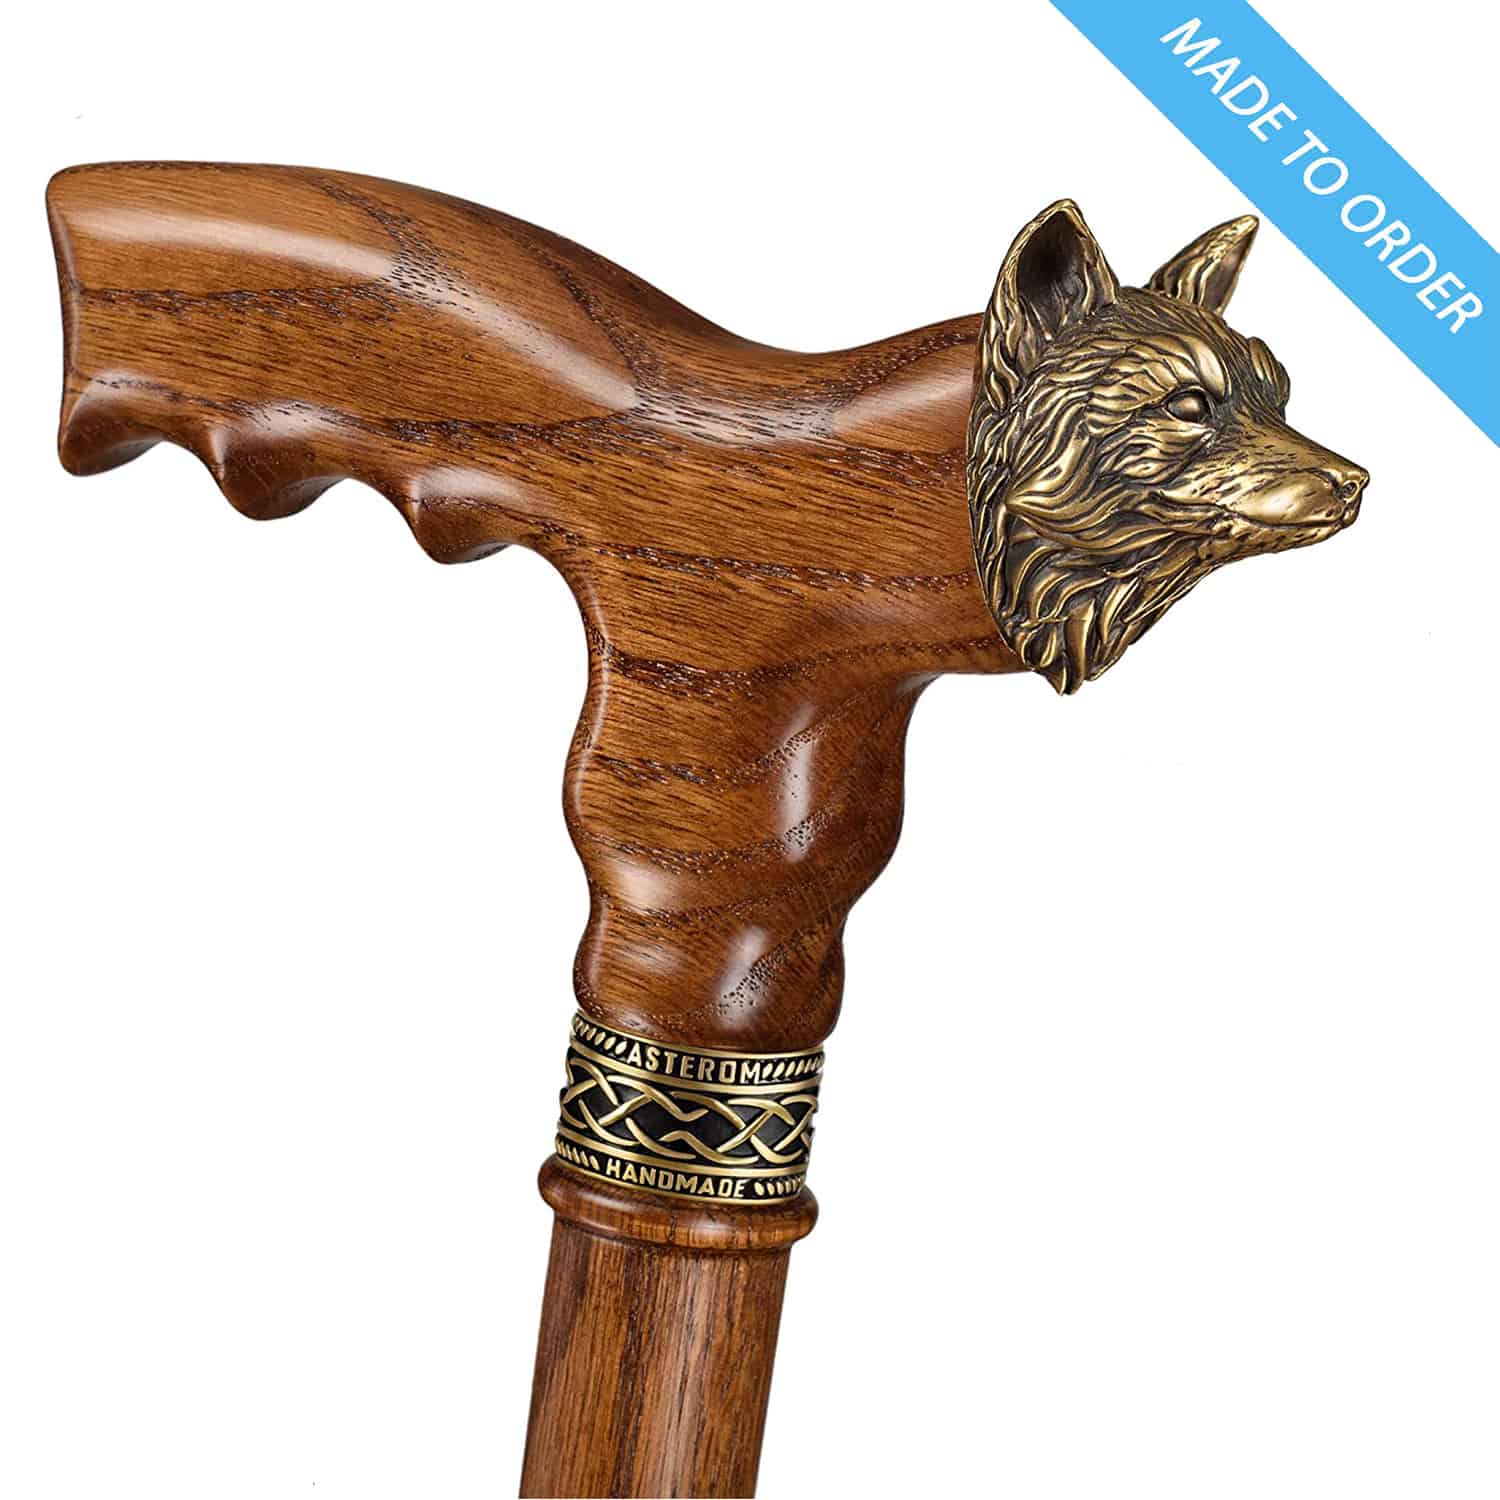 Handcrafted Wooden Walking Stick Cane With Beautiful Hand Carved Design US